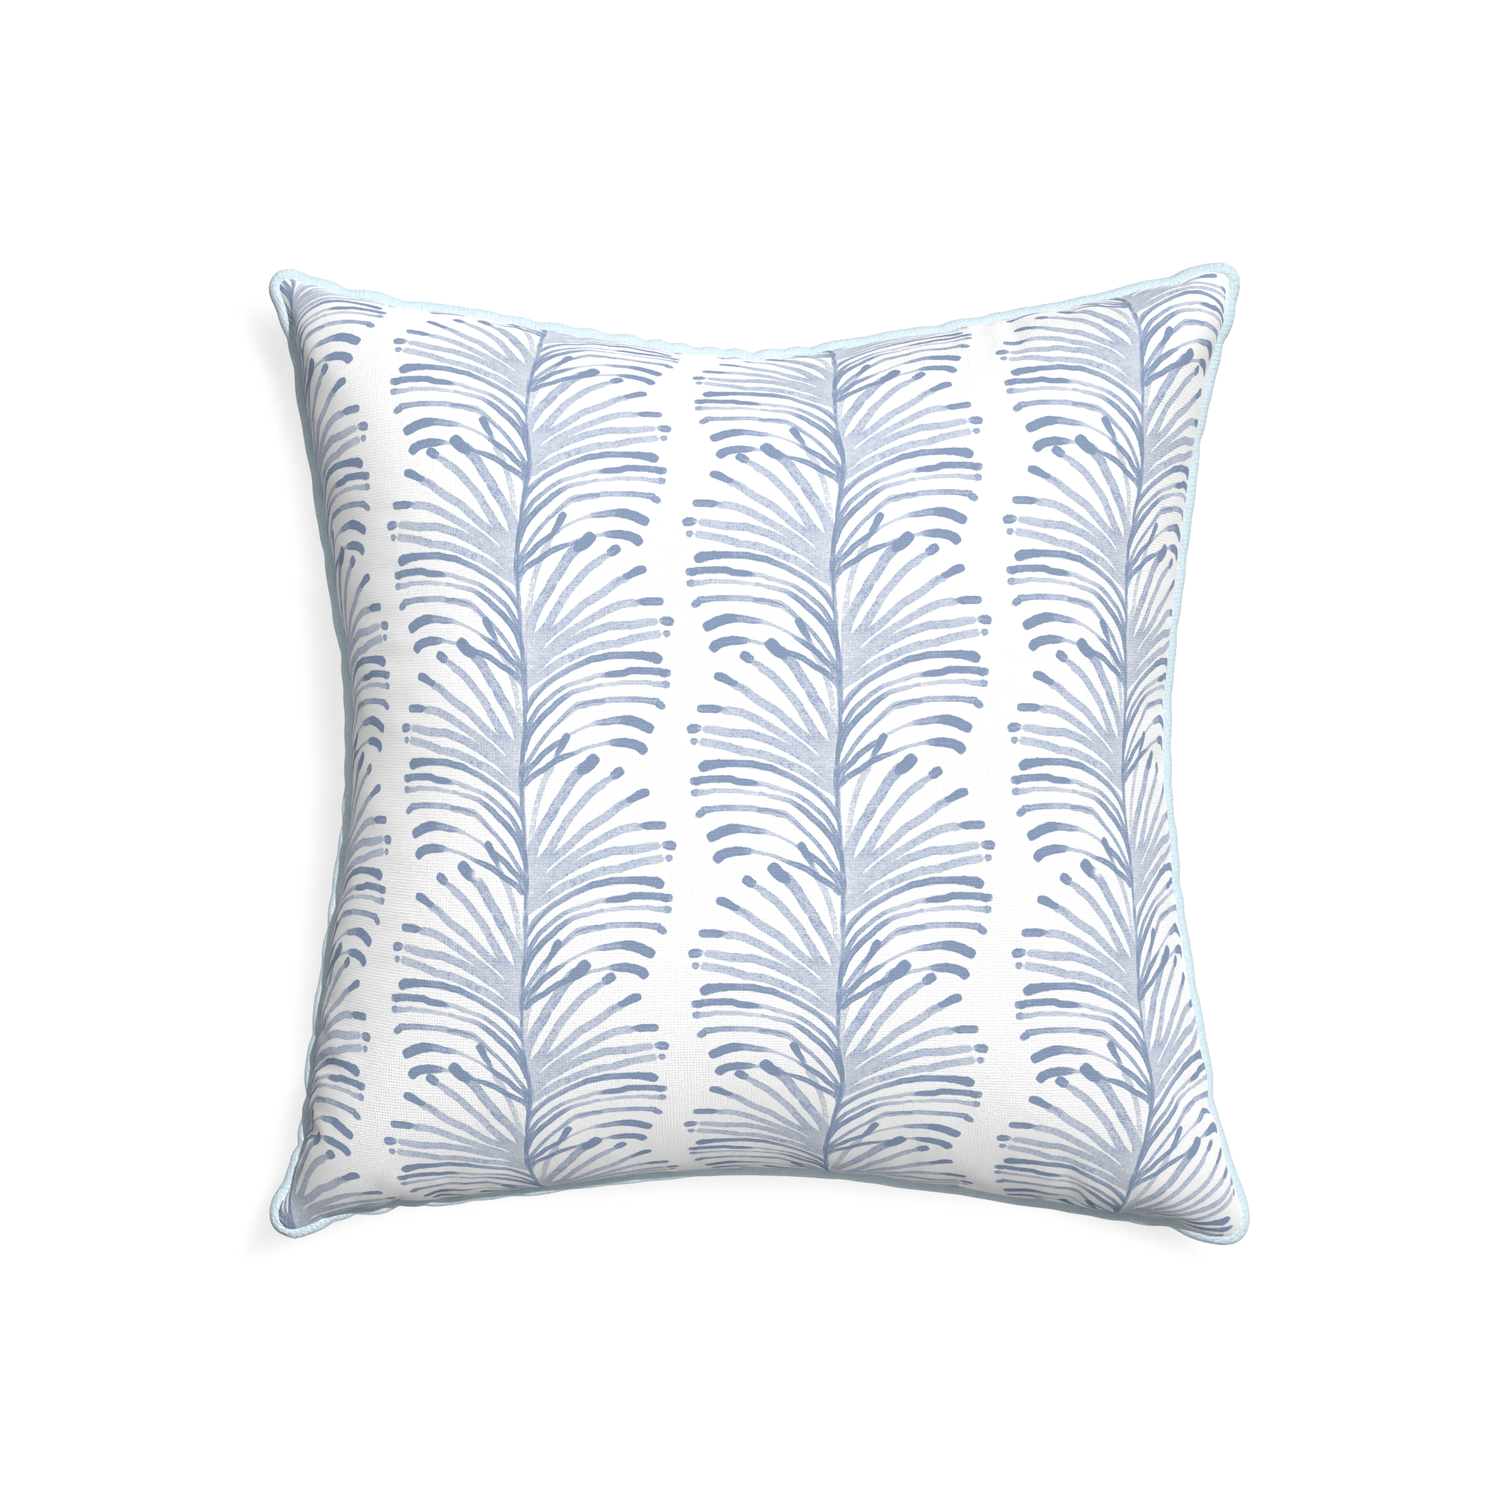 22-square emma sky custom sky blue botanical stripepillow with powder piping on white background